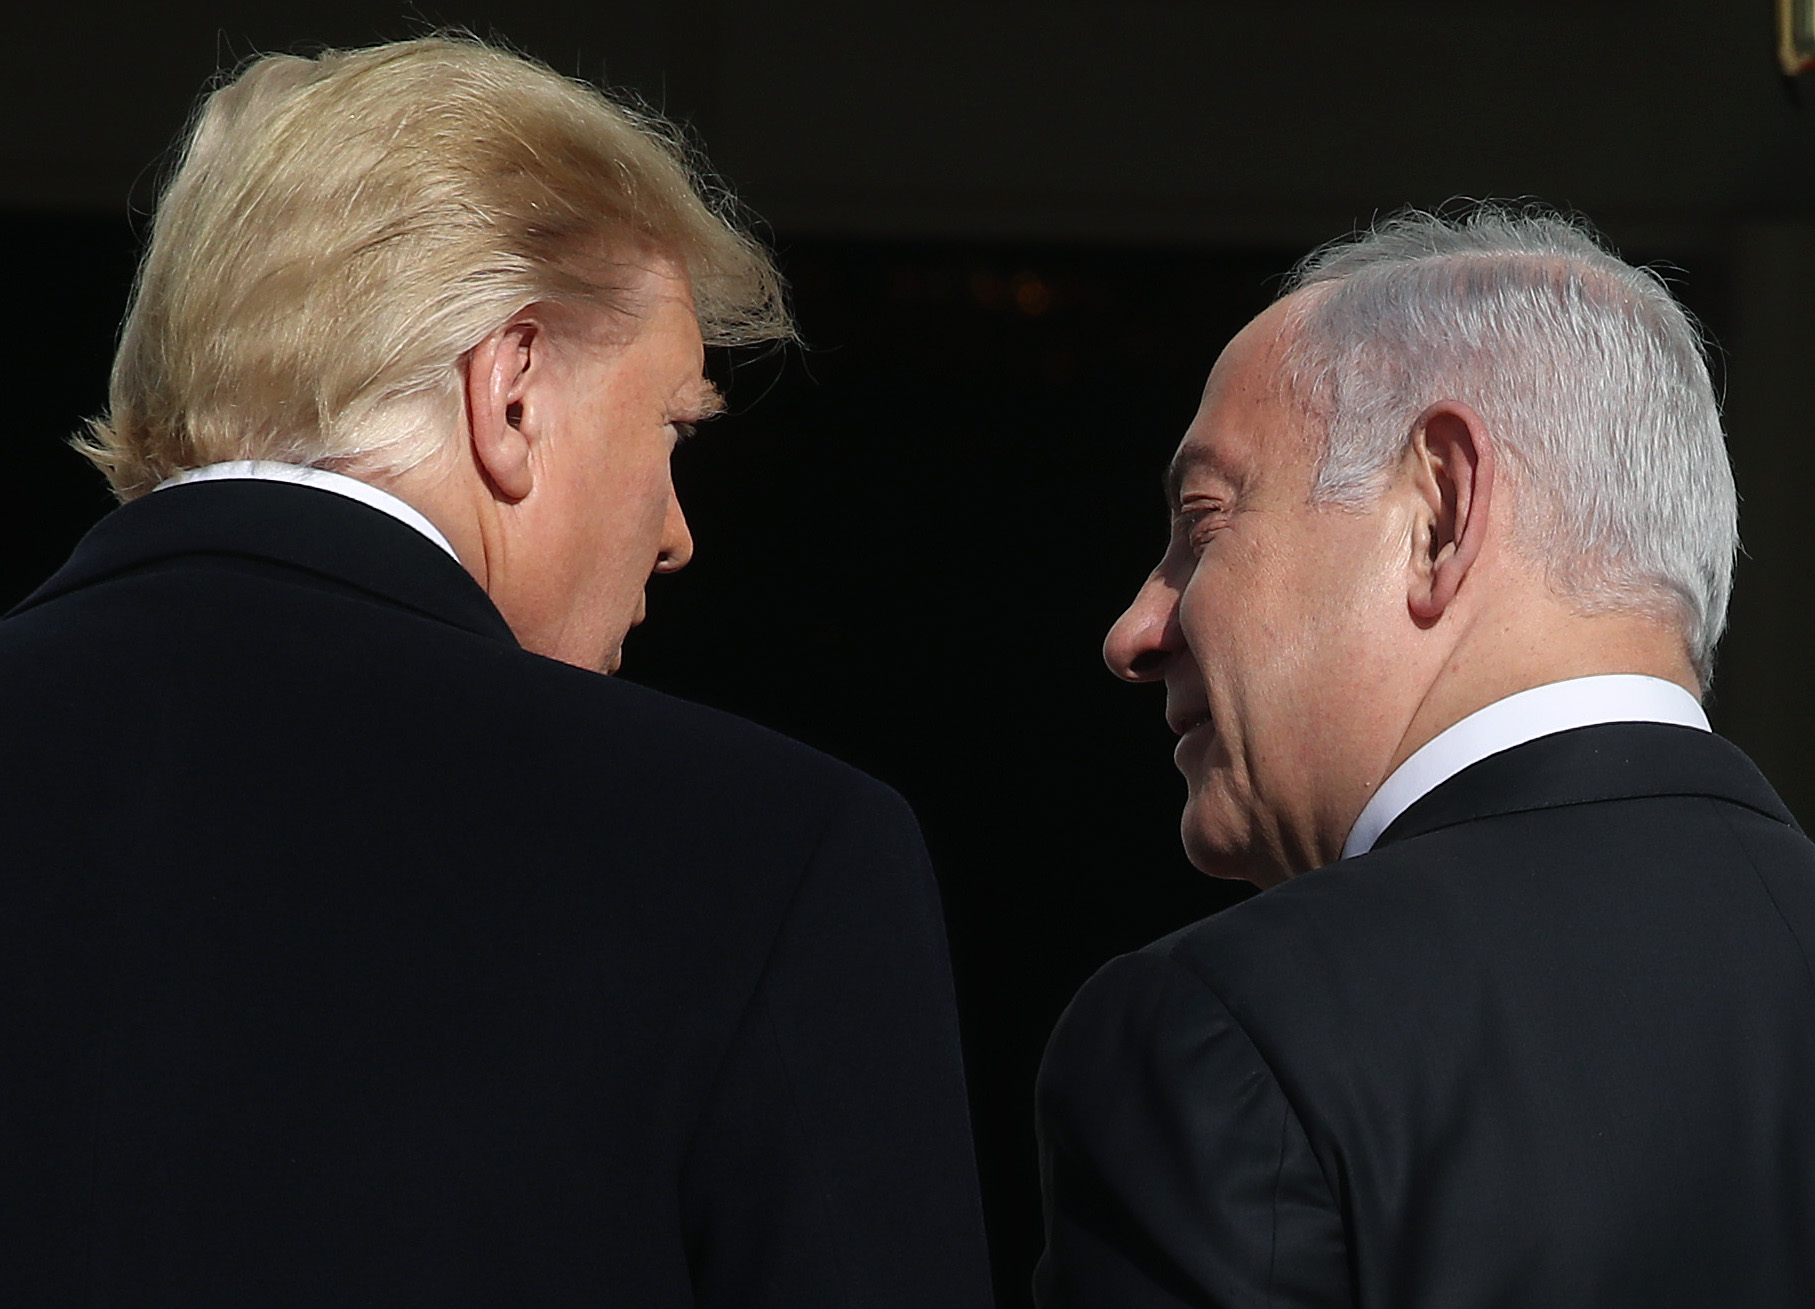 Israel’s Right-Wing Rhetoric Offers a Glimpse of the GOP Future